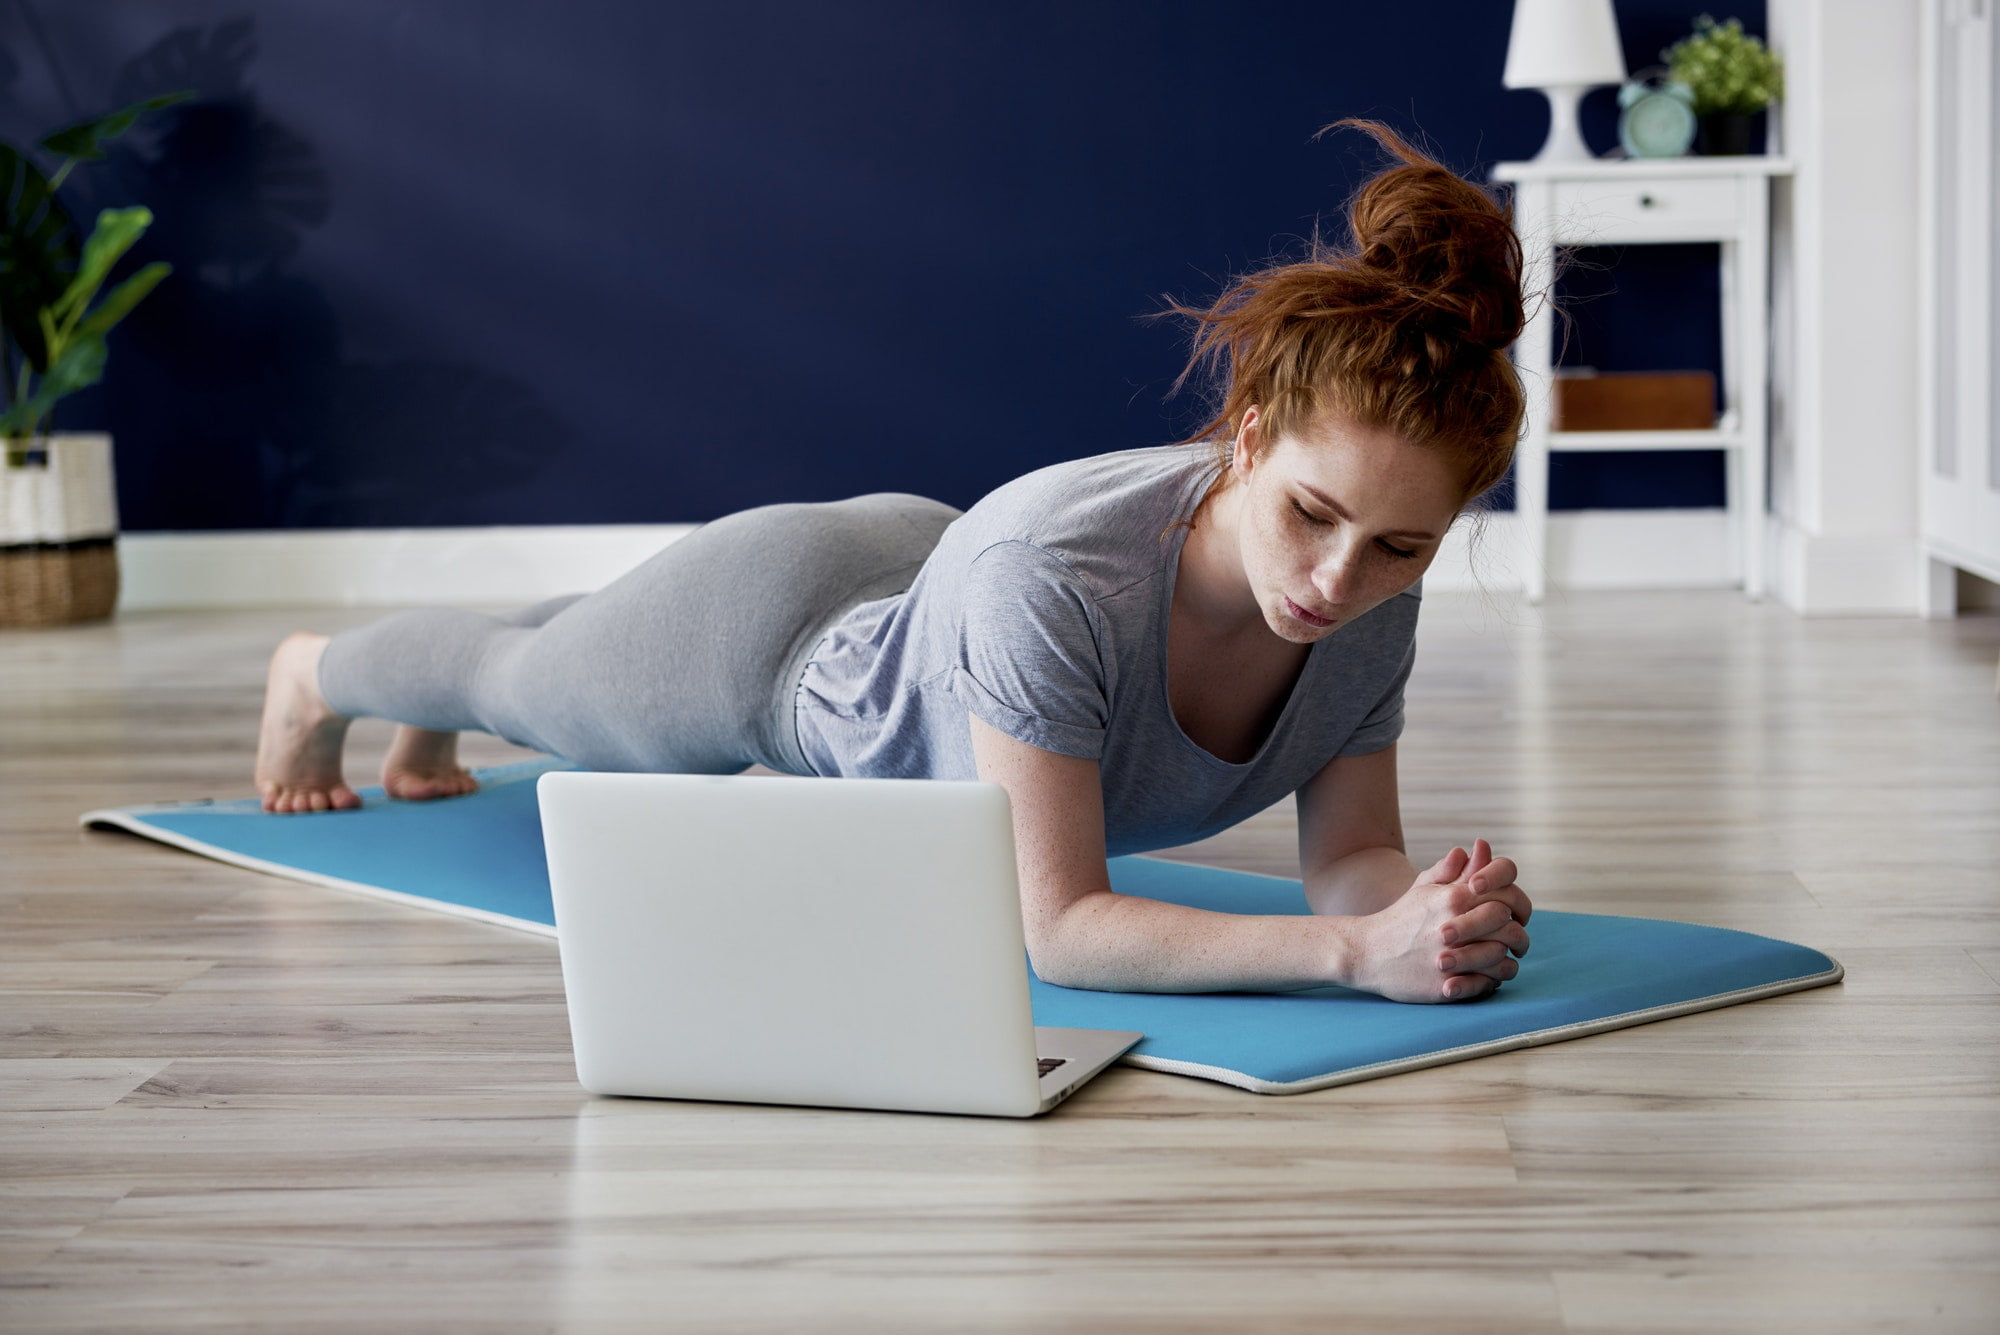 Redhead woman doing some yoga exercises at home